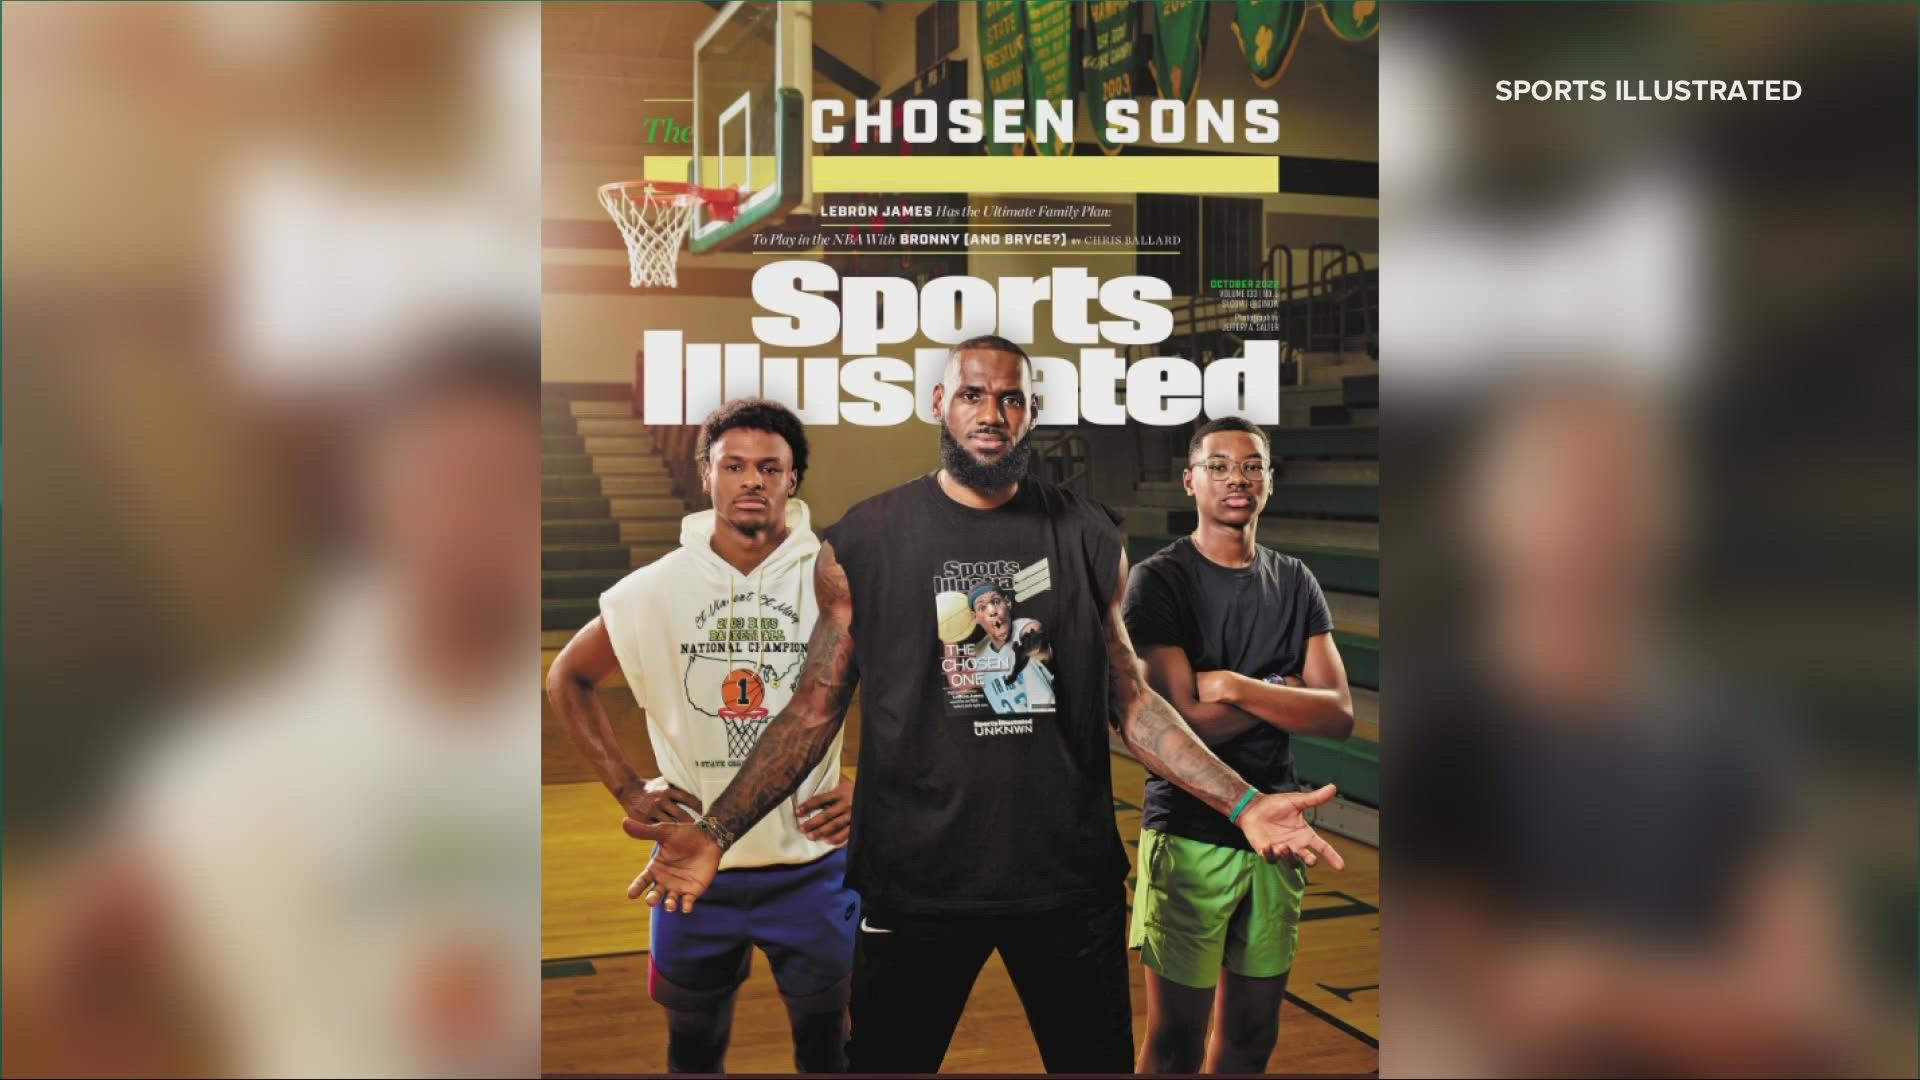 Speaking with Sports Illustrated, LeBron James discussed his aspirations to one day play with his sons in the NBA.